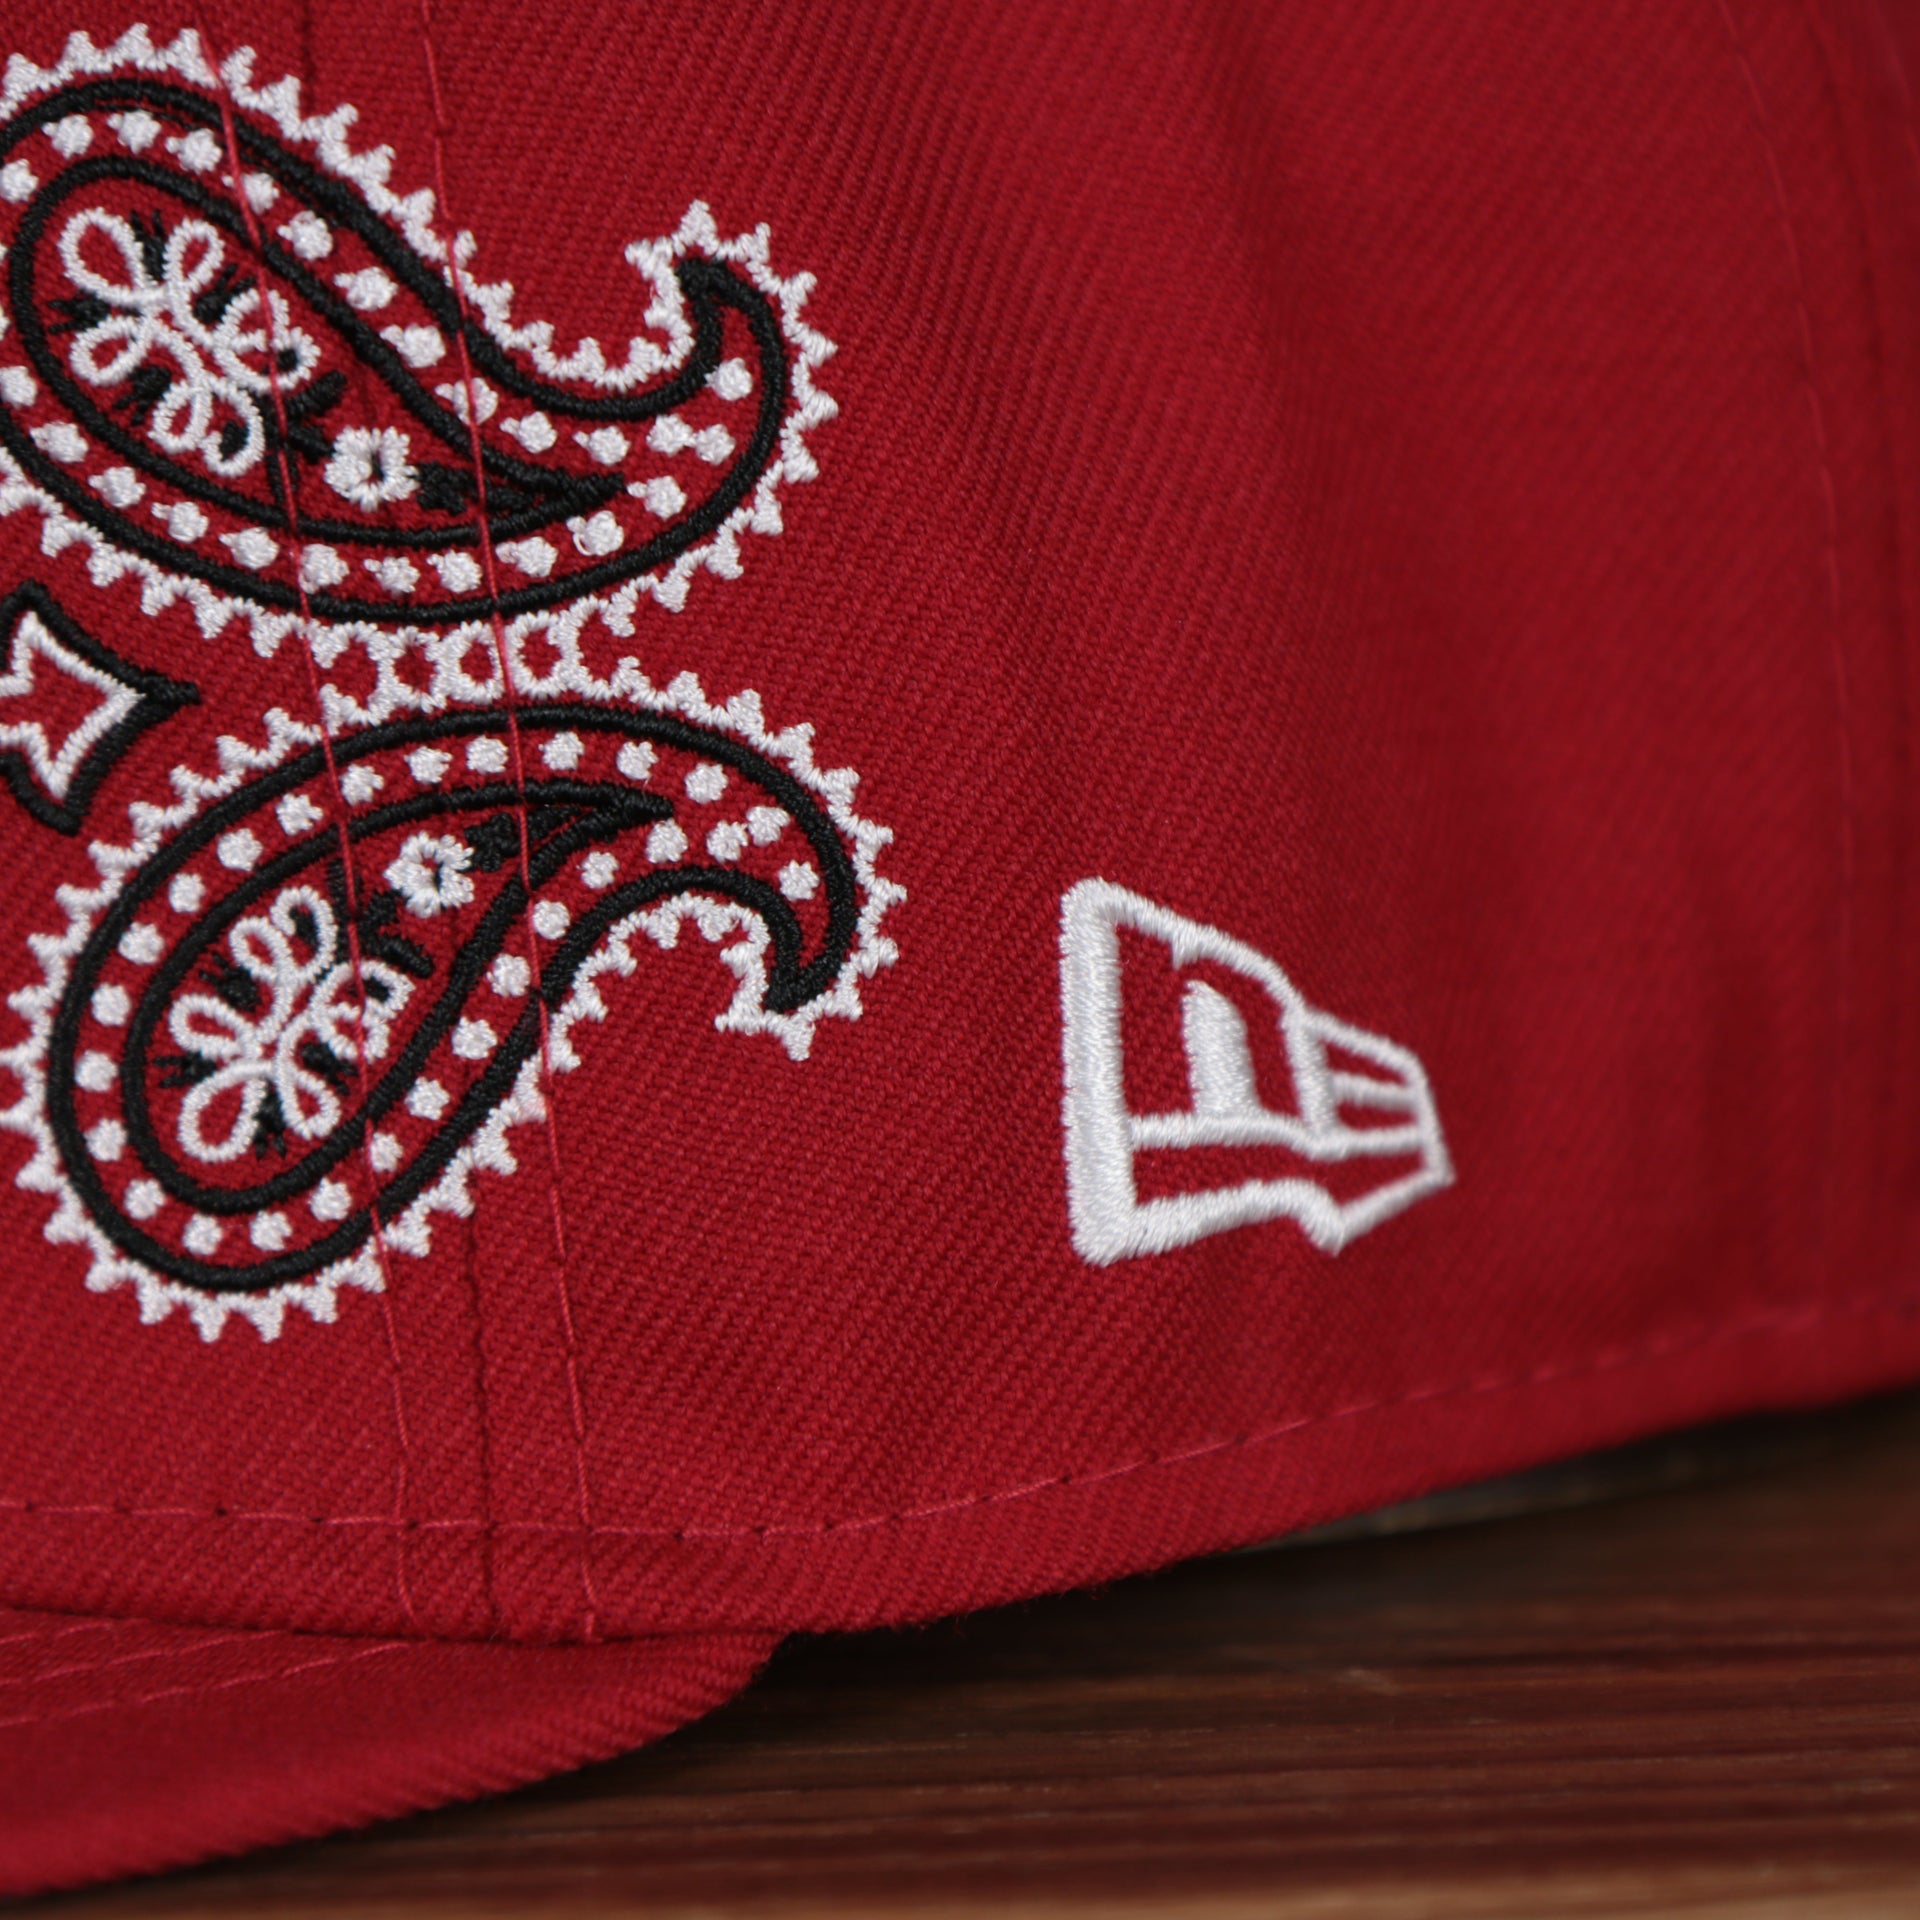 new era logo on the Cincinnati Reds All Over Paisley Bandana Pattern Grey Bottom 5950 Fitted Cap | Red